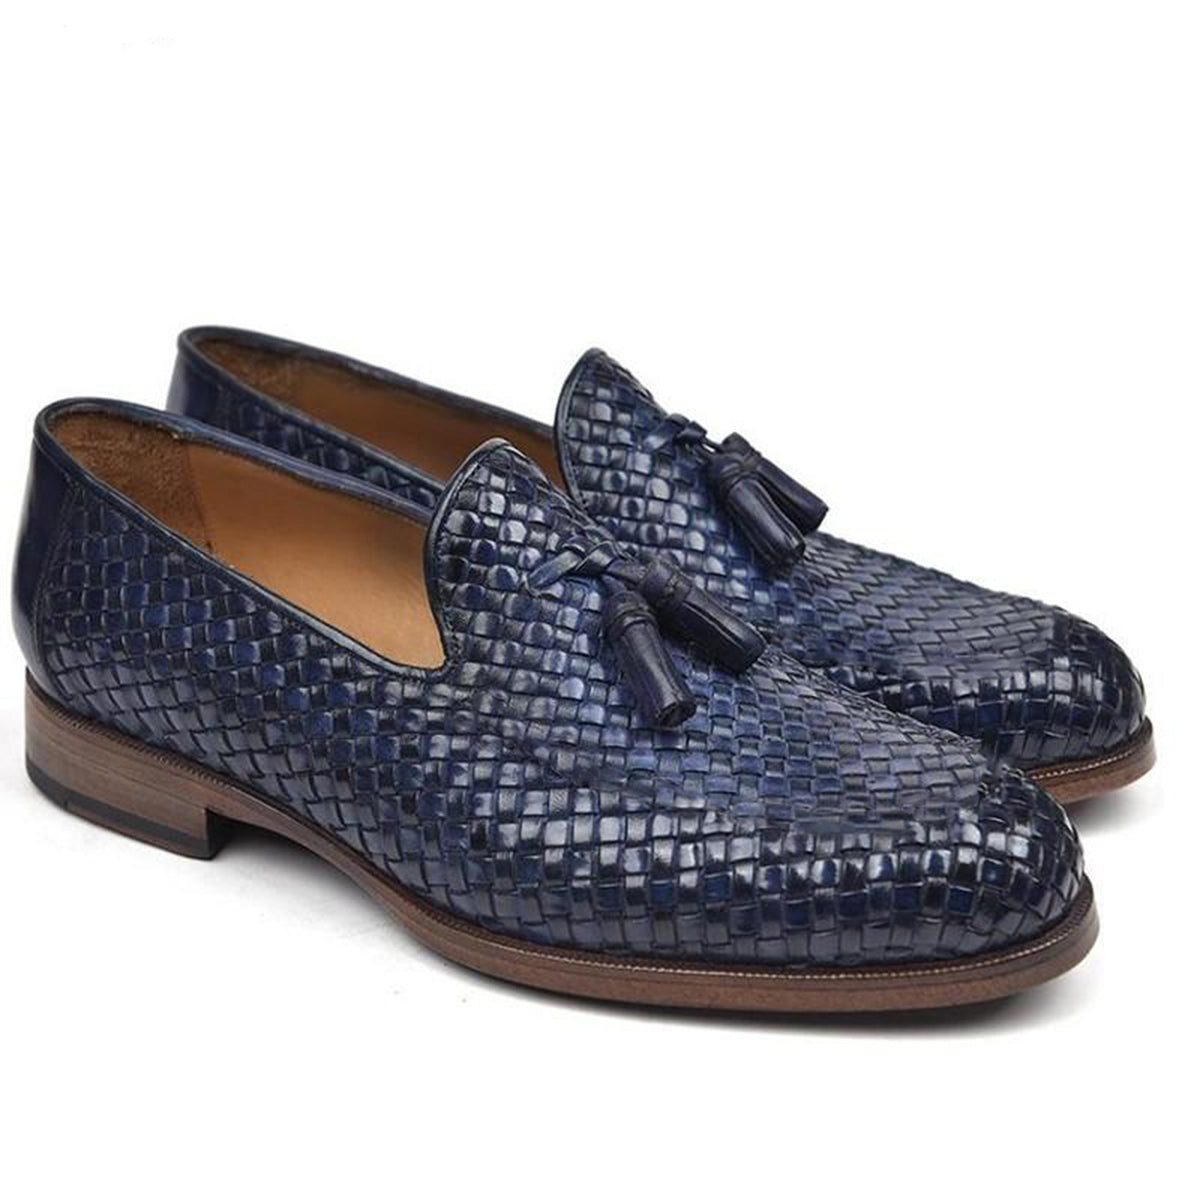 Navy Blue Patina Finish Braided Woven Leather Formal Tassel Loafer Slip On Shoes for Men with Leather Sole. Goodyear Welted Construction Available.